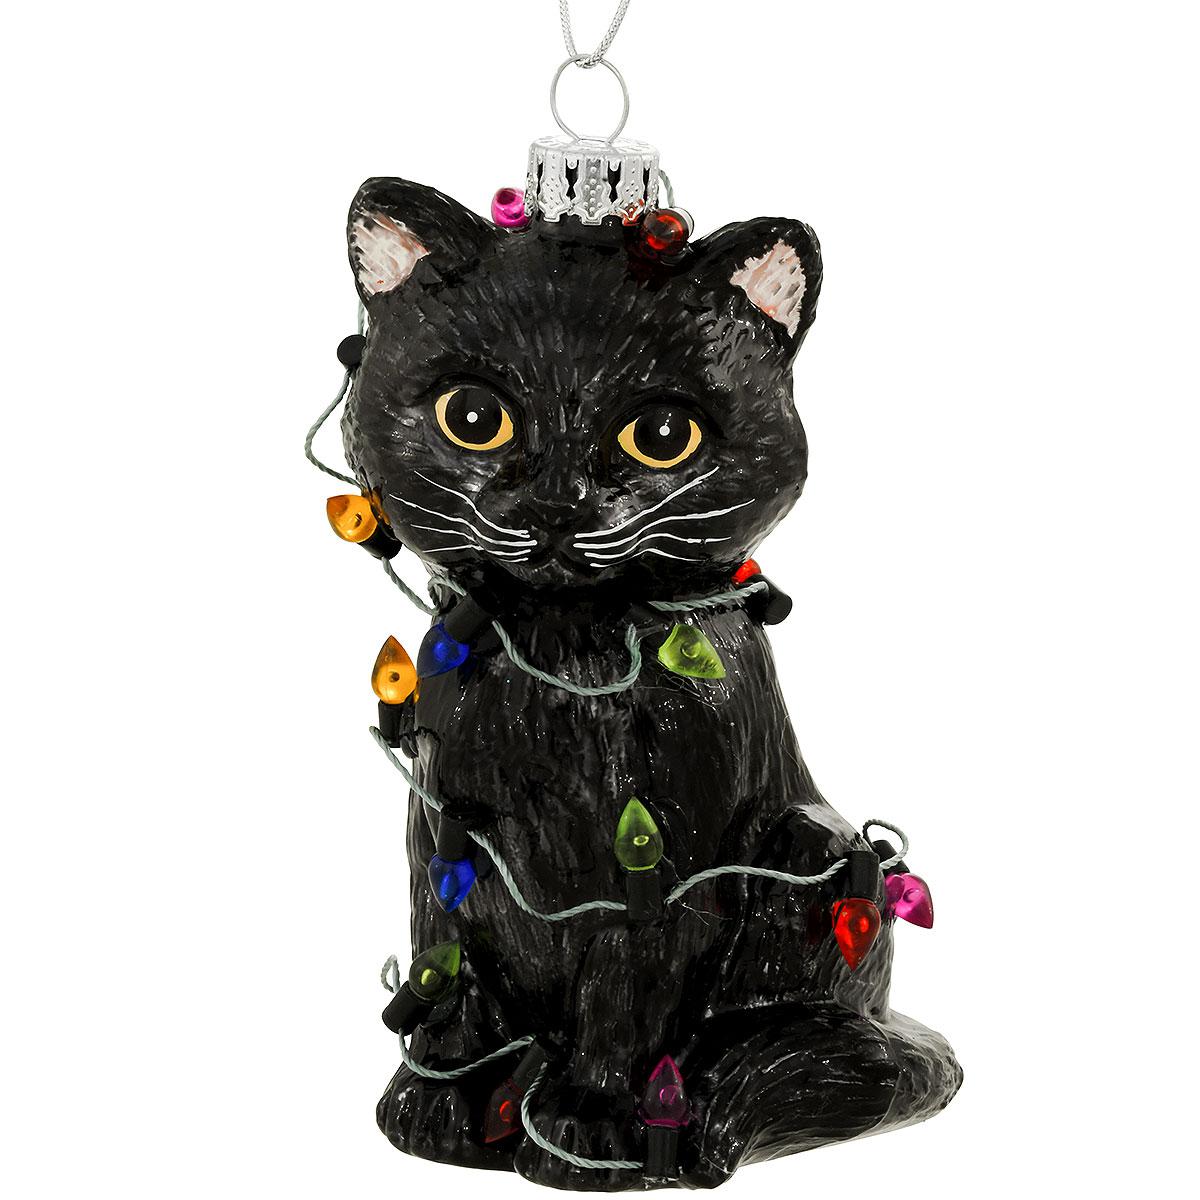 Black tabby cat wrapped in lights glass ornament